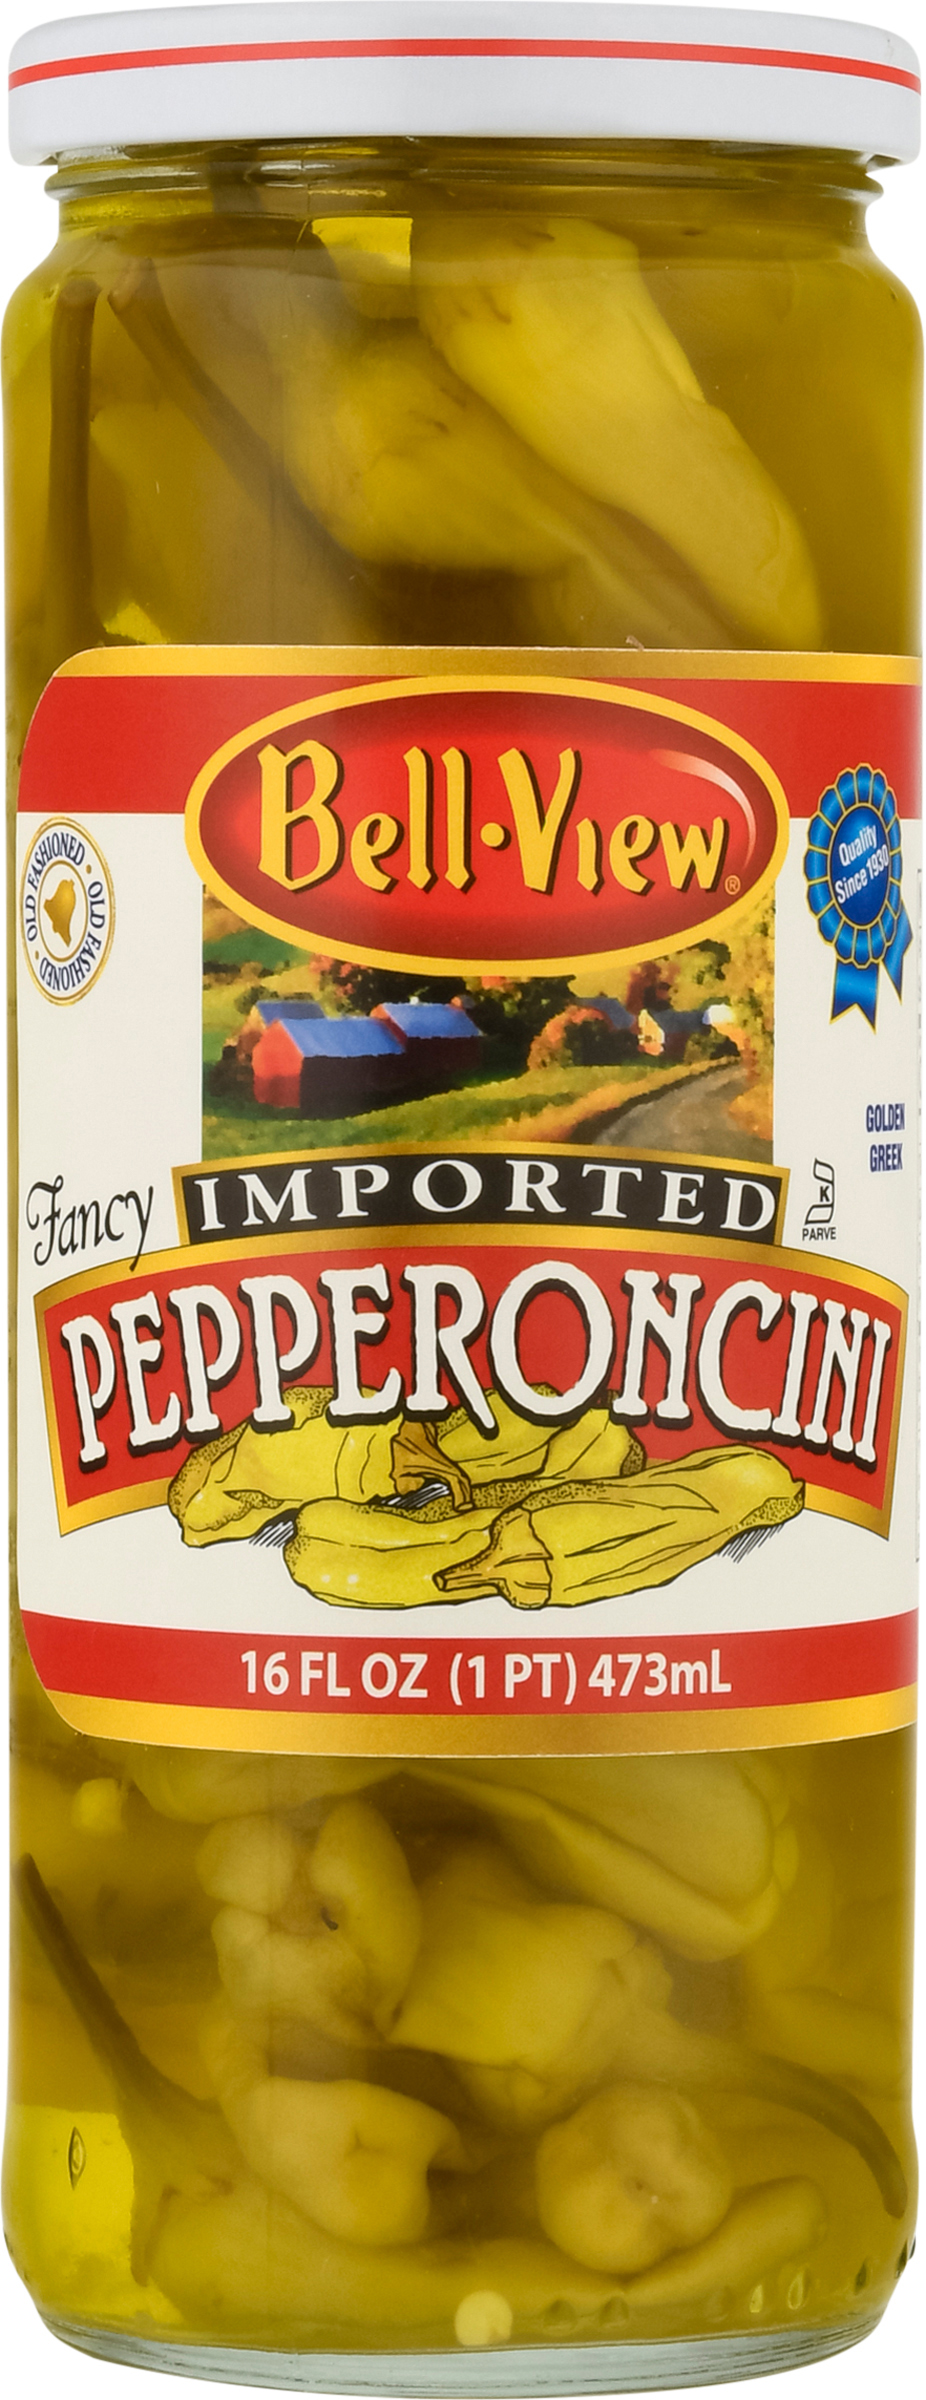 Pepperoncini, Imported